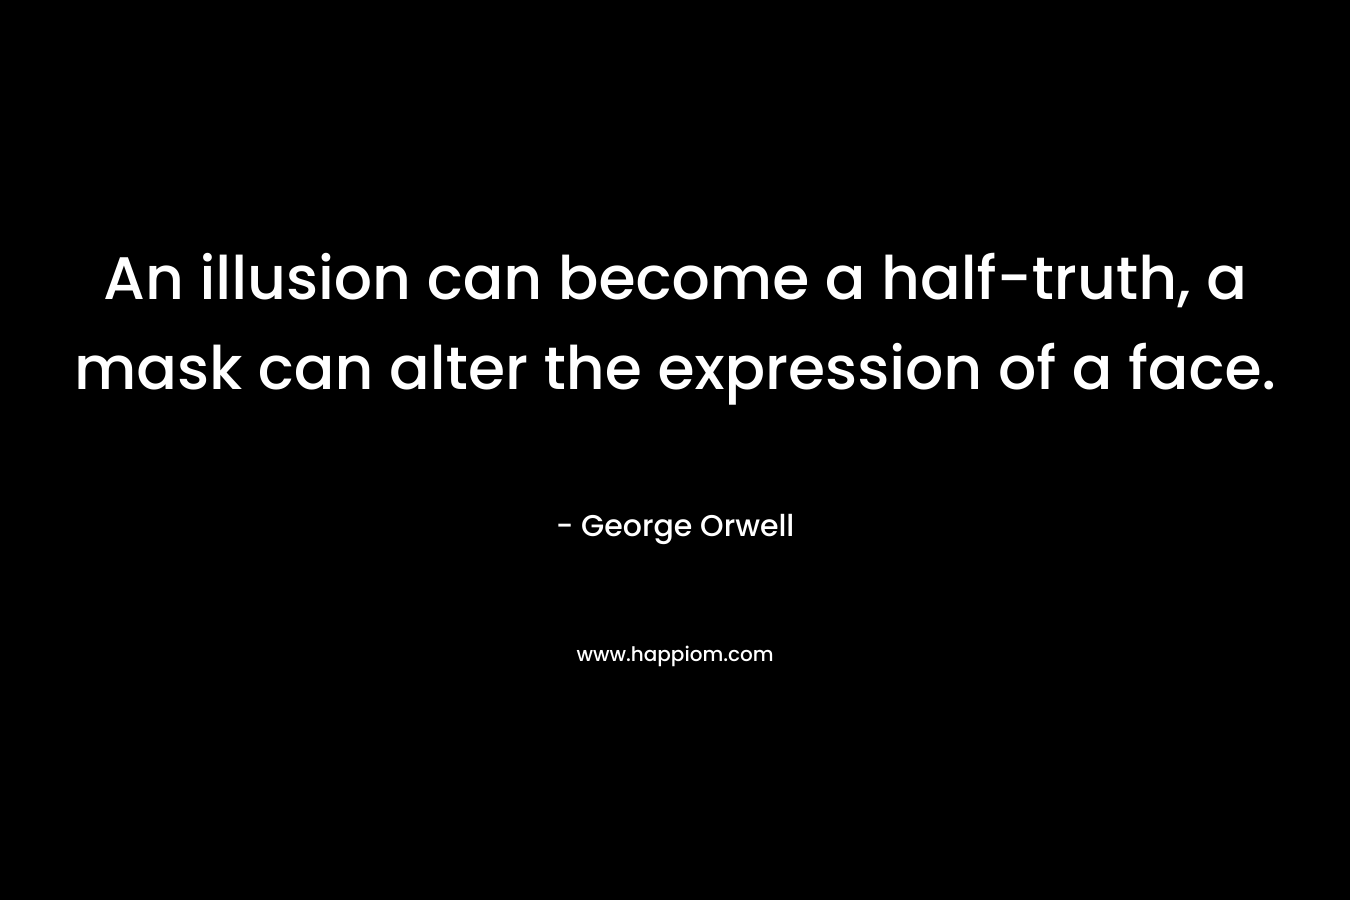 An illusion can become a half-truth, a mask can alter the expression of a face. – George Orwell